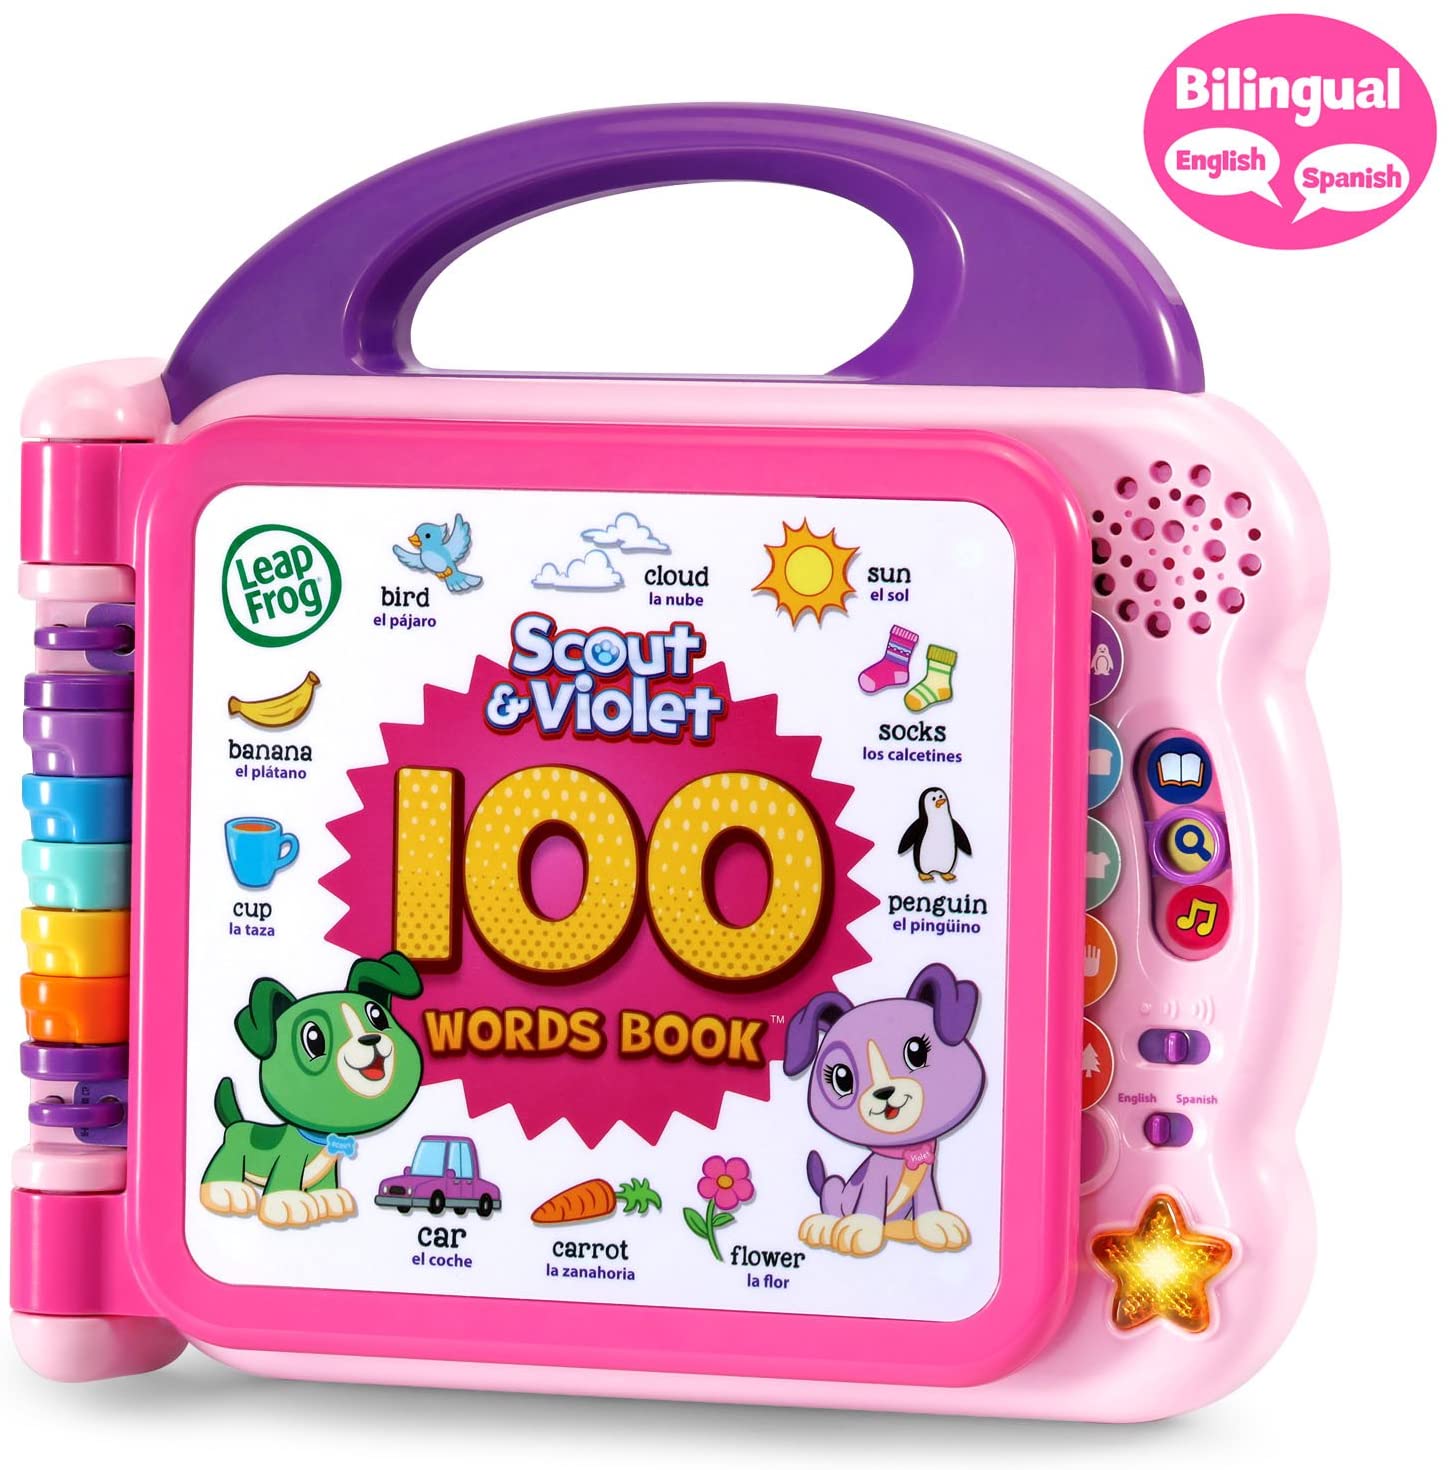 LeapFrog Scout and Violet 100 Words Book - image 1 of 2